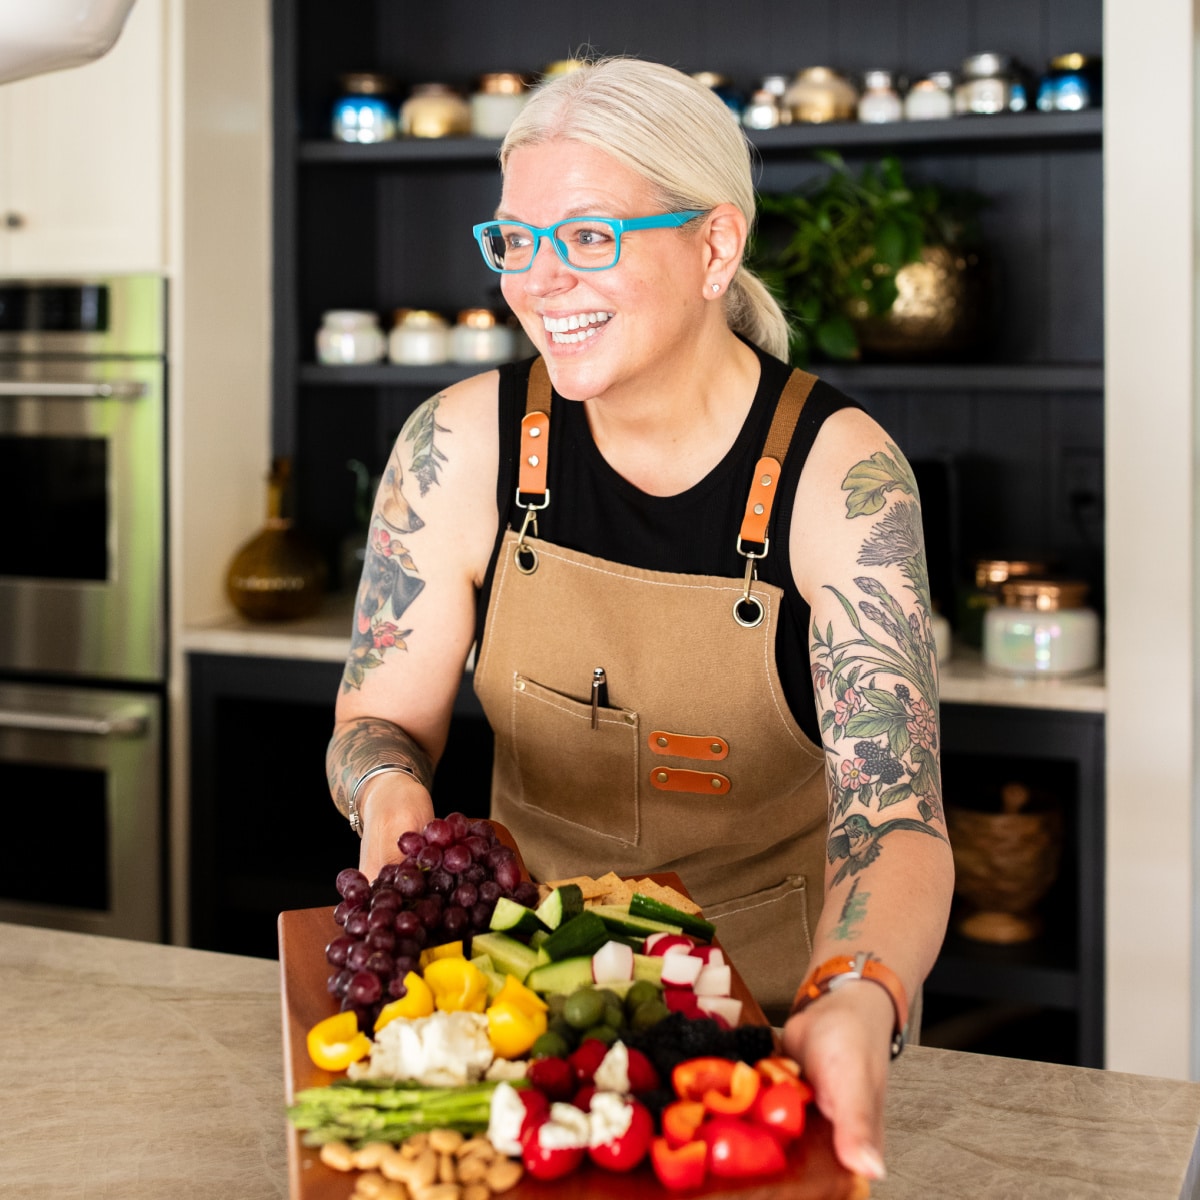 Kristina, founder of spabettie.com, is standing at a stone countertop holding a large wooden board of veggies, fruits, cheeses and crackers. She is wearing a tan chefs apron over a black sleeveless top, showing tattooed arms.